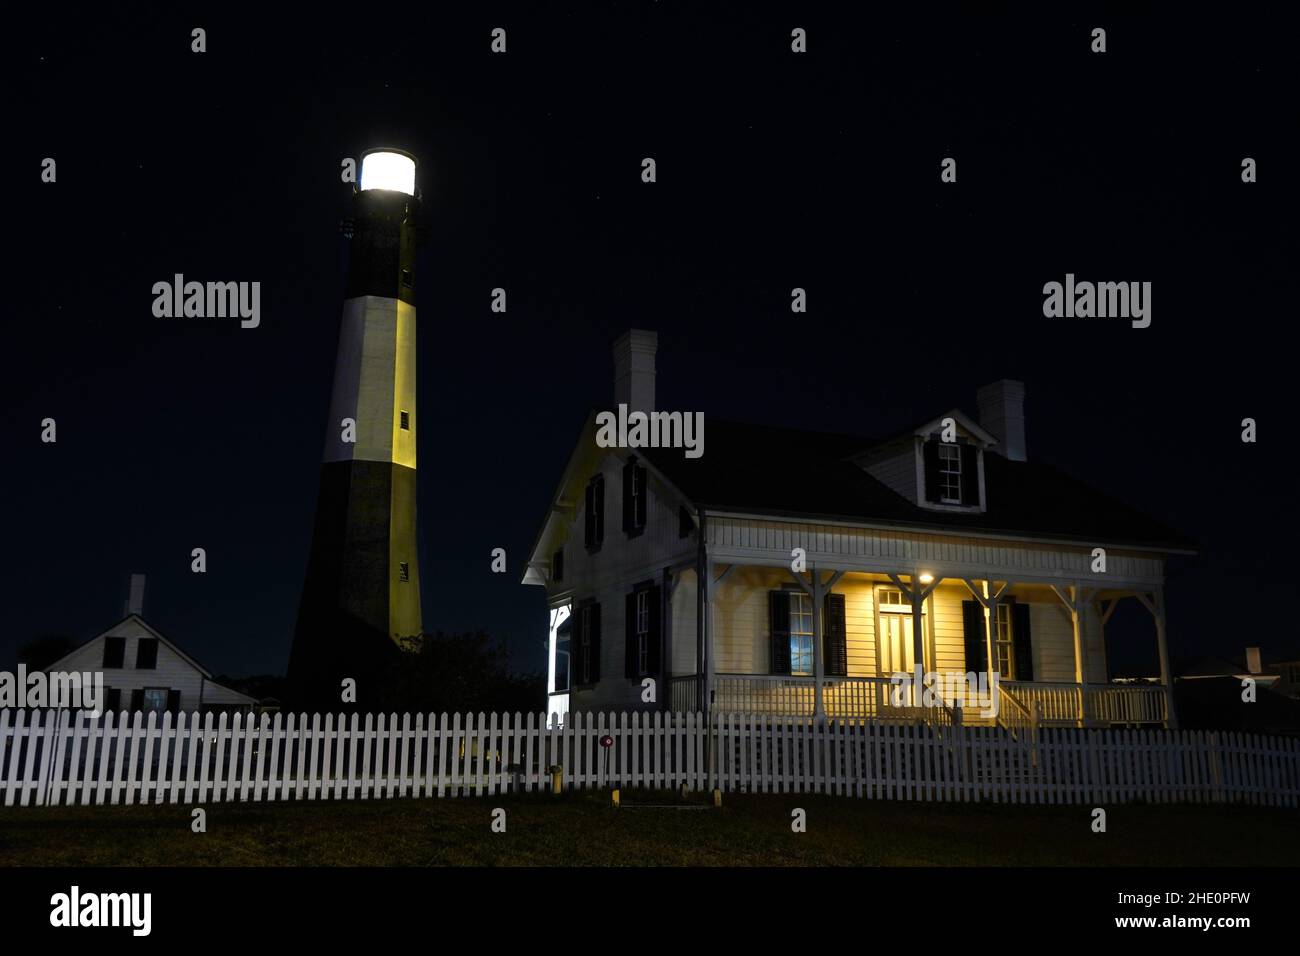 Tybee Island Lighthouse and the Keeper's House at Night. Tybee Island Lighthouse is the tallest and oldest lighthouse in Georgia. Stock Photo